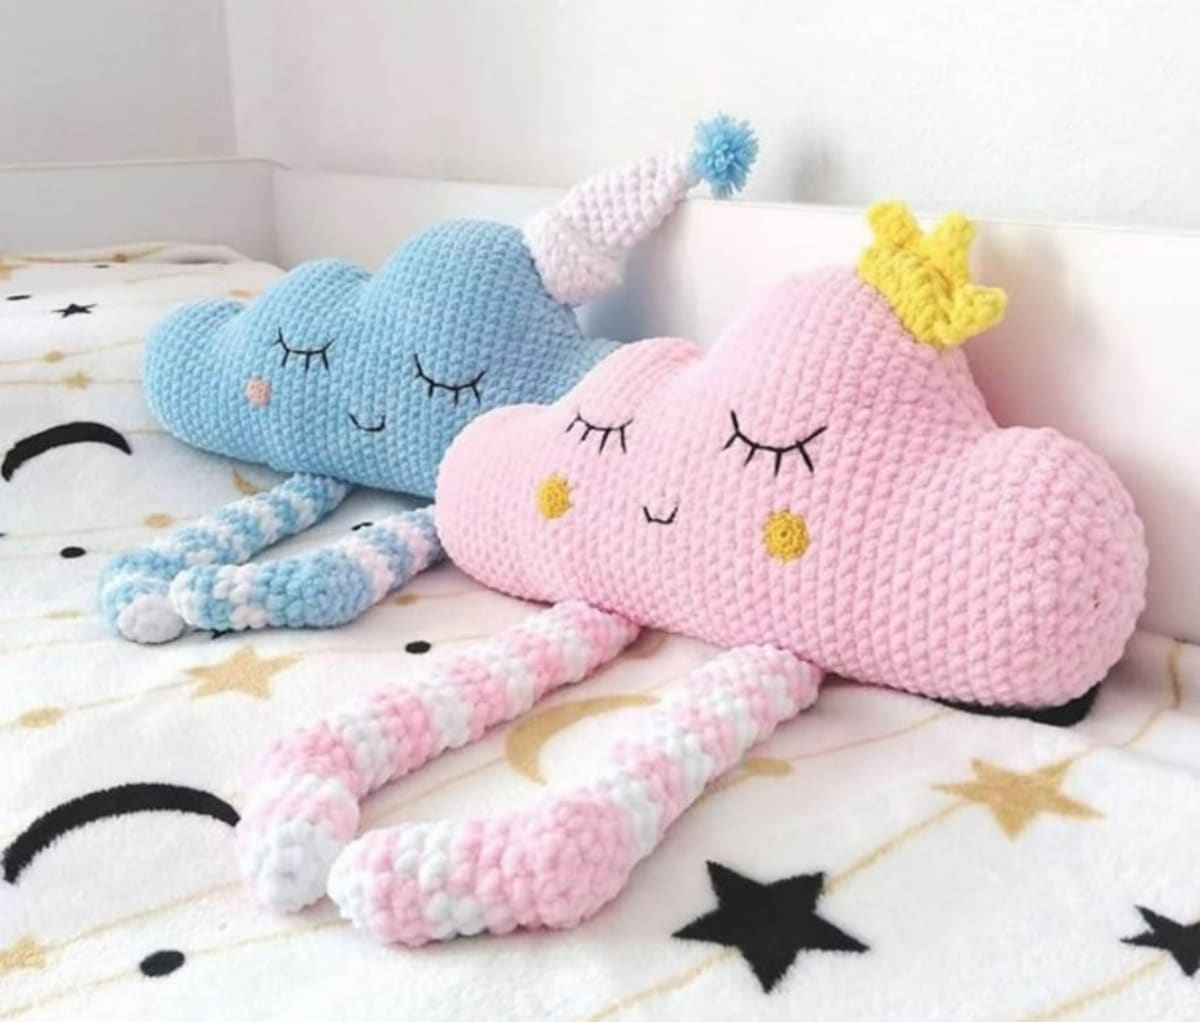 Two cloud shaped pink and blue crochet cushions with simple sleeping expressions and legs dangling from the cushions. 